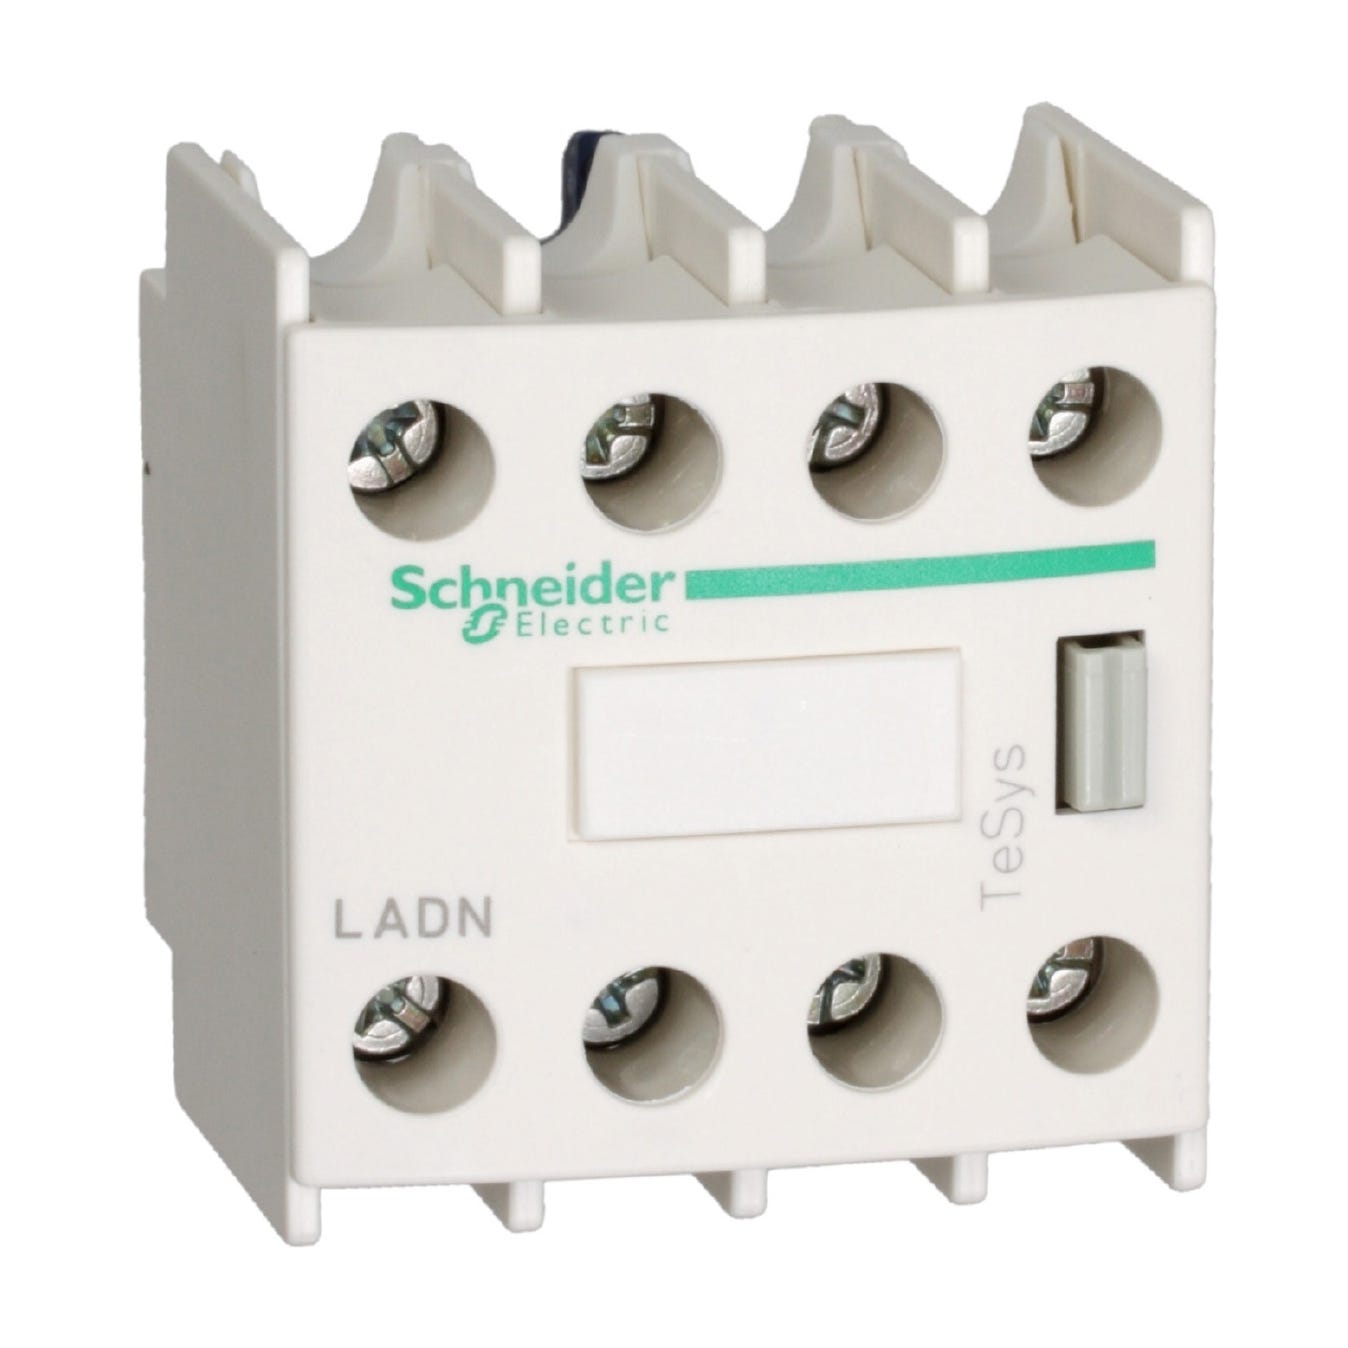 bloc contacts auxiliaires - 3o+1f - a vis - schneider electric ladn13 0